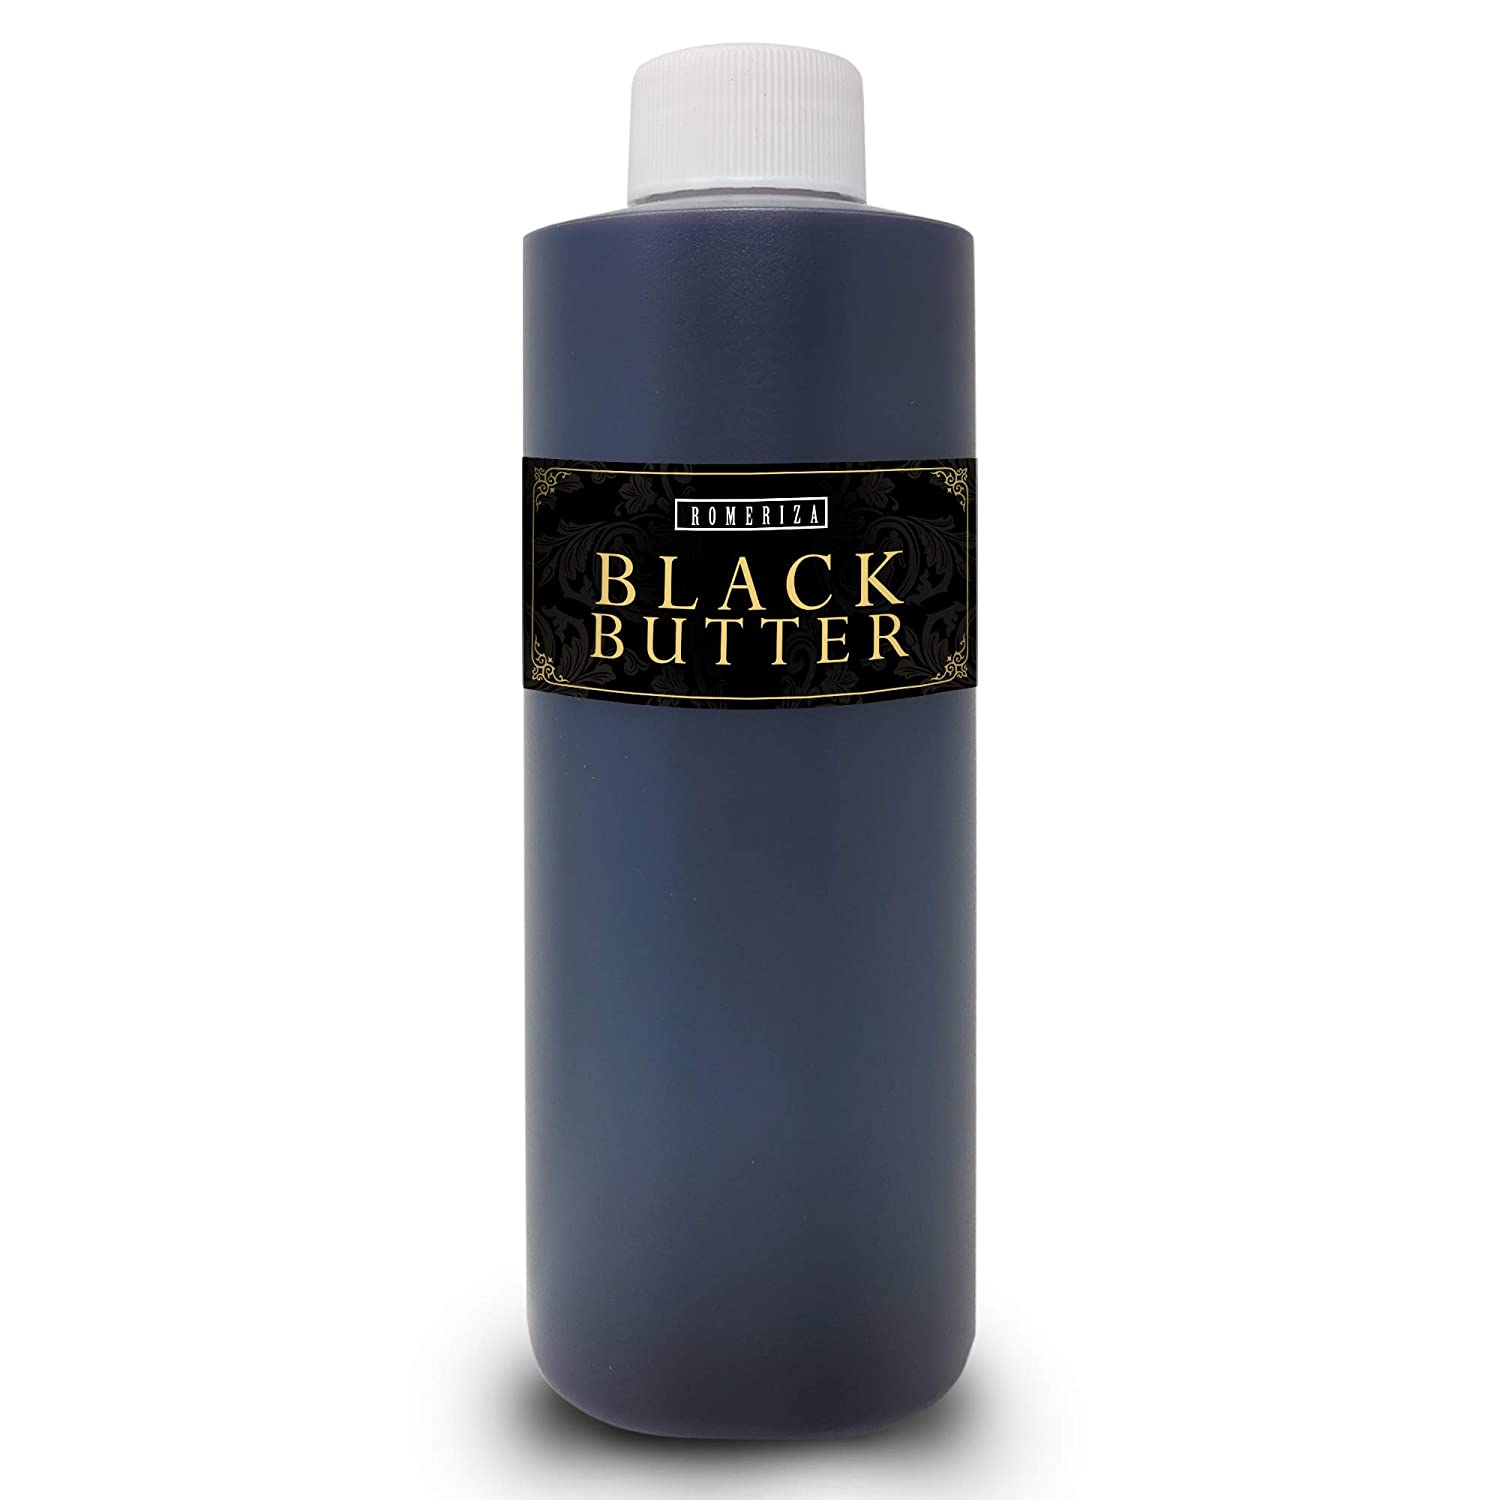  Black Butter Fragrance Oil 4 fl. oz. Scented Oil for DIY Soap  Making, Candles, Bath Bombs, Body Butters. Used in Aromatherapy Diffusers,  Burners and Warmers. Great Addition to Lotions and Creams. 